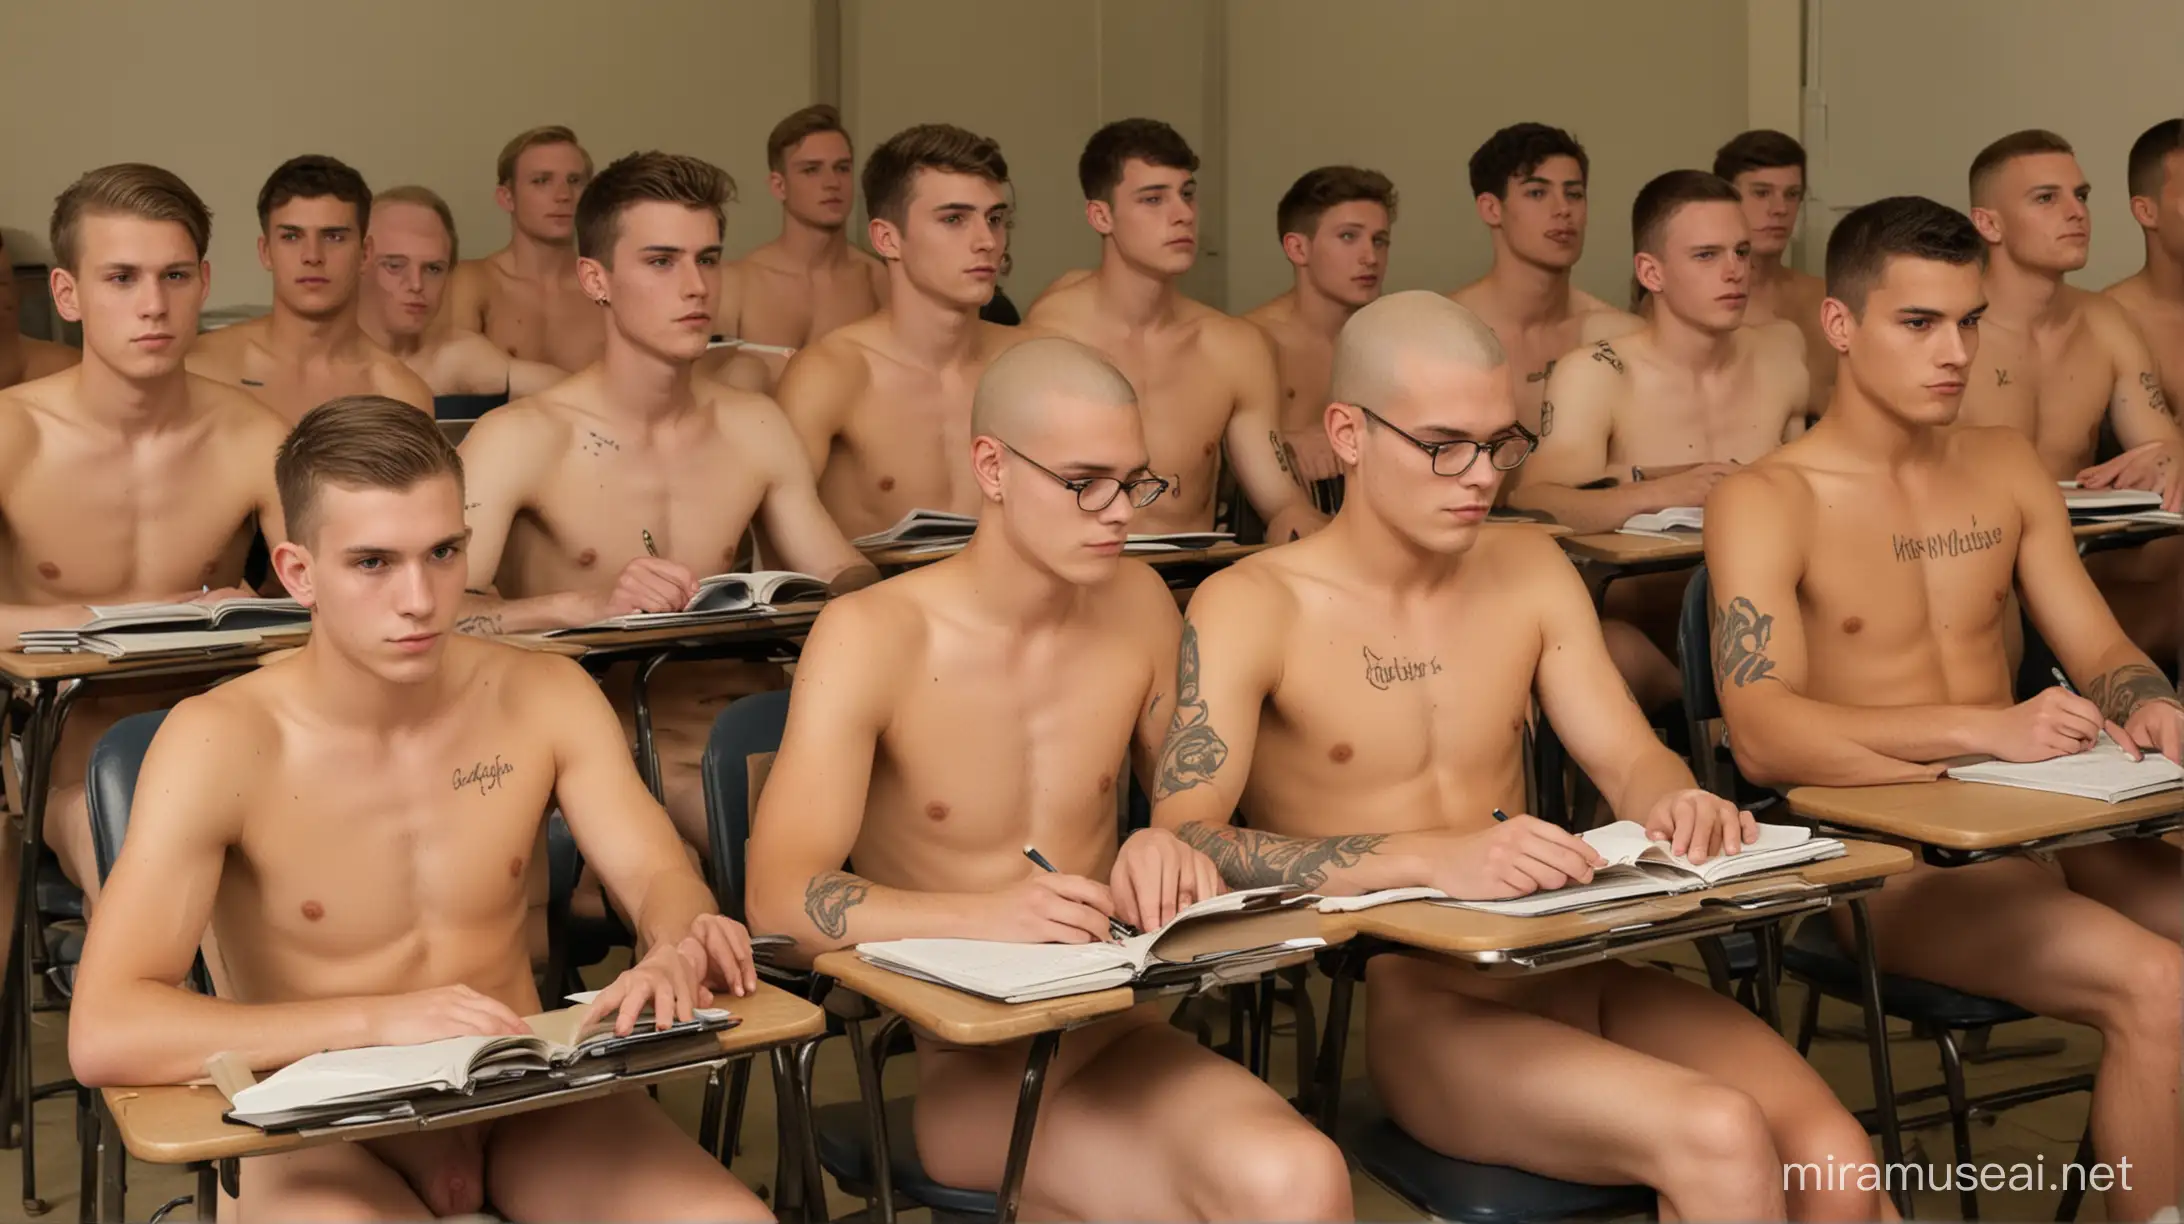 Diverse Group of Young Men Studying Naked in Classroom Setting